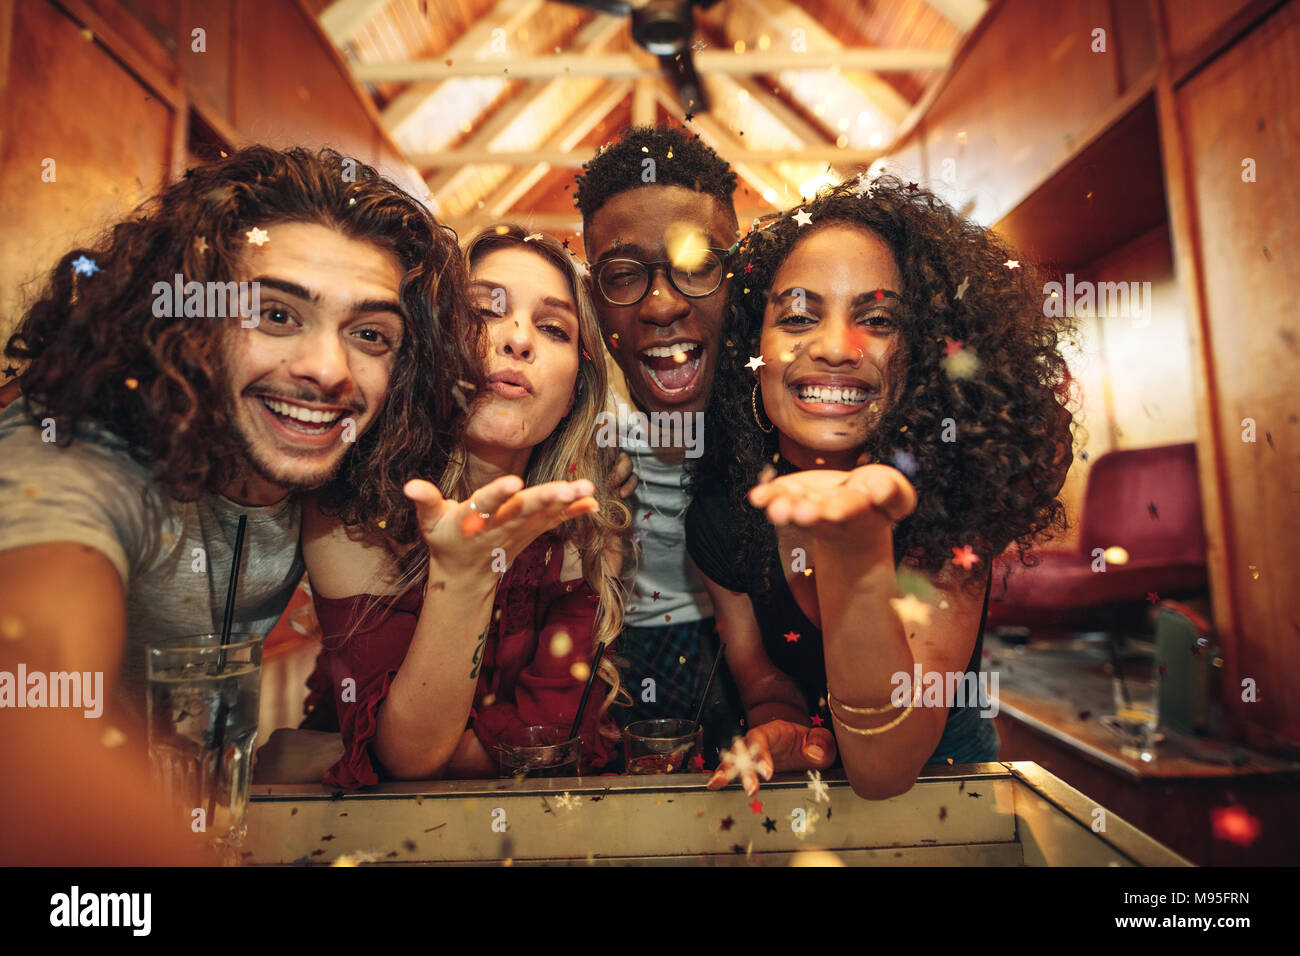 Group of friends enjoying a party and blowing confetti. Men and women capturing the fun in selfie at nightclub. Stock Photo